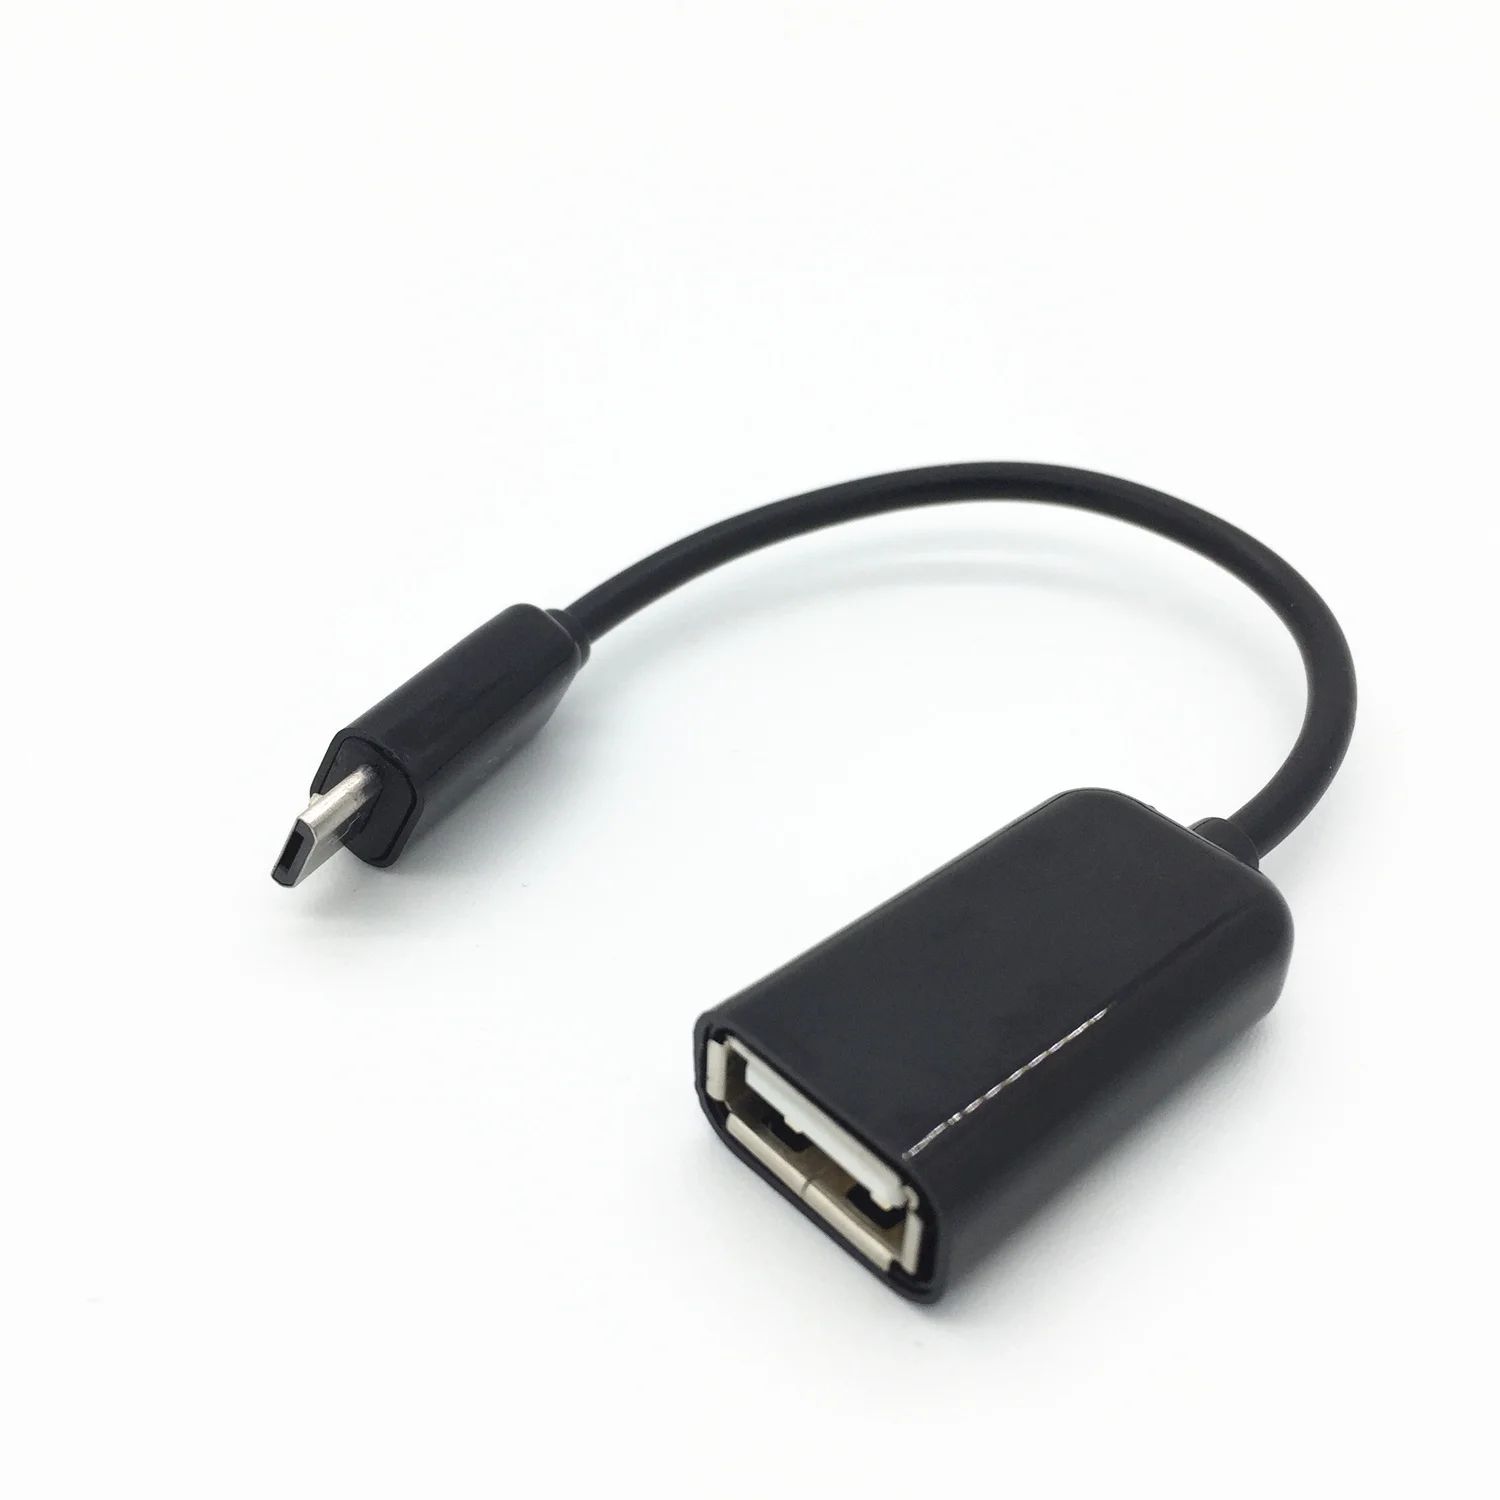 

USB Host OTG Adaptor Adapter Cable/Cord for Samsung Galaxy Note II 2 SCH-R950 SGH-t889 SPH-L900 LTE GT-N7105